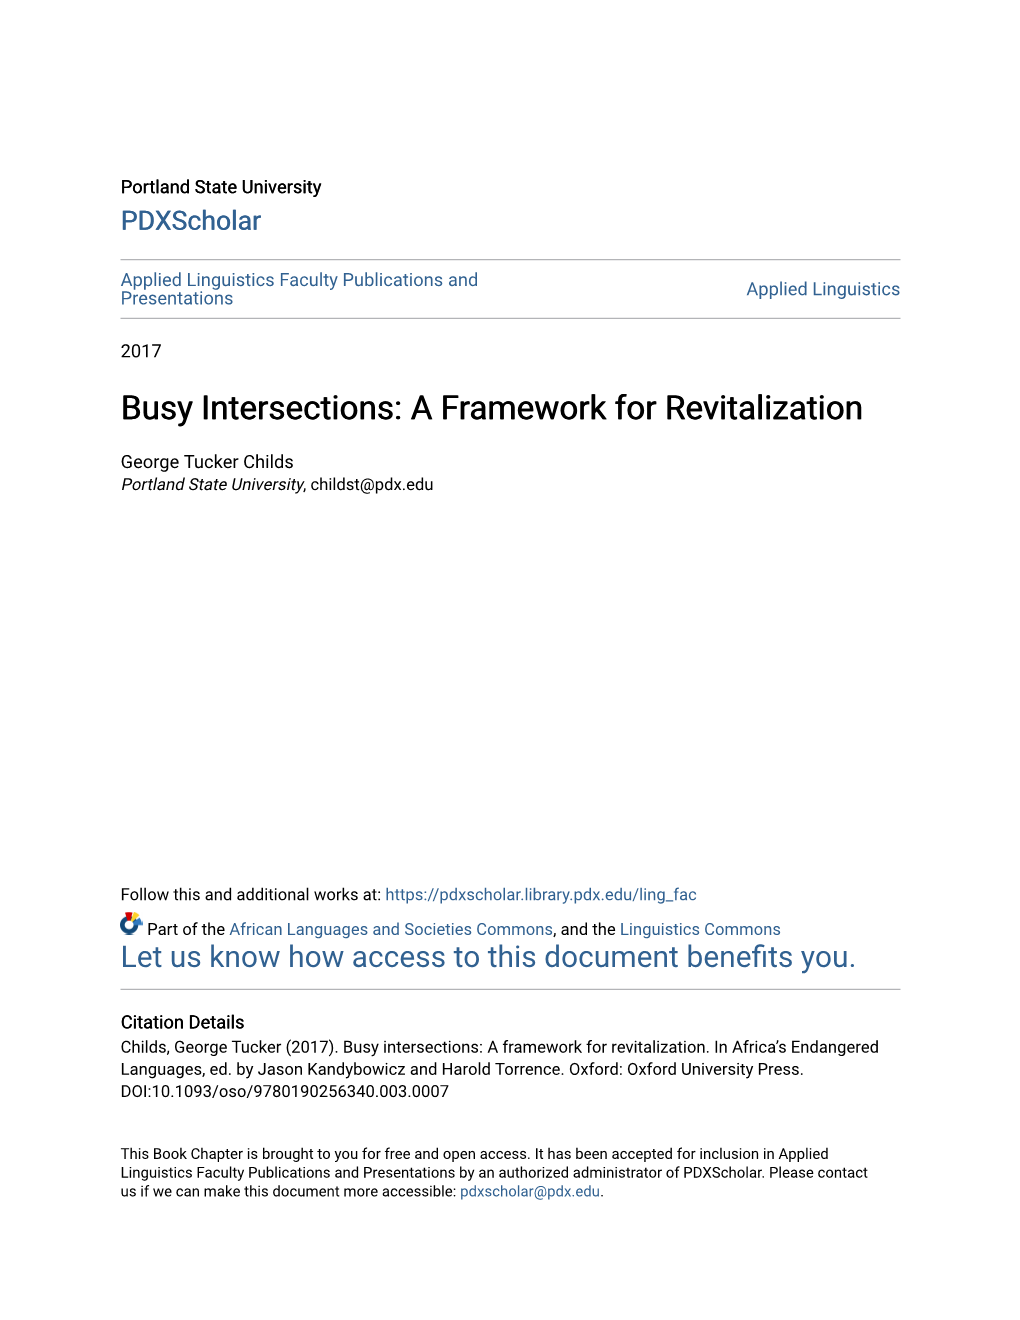 Busy Intersections: a Framework for Revitalization